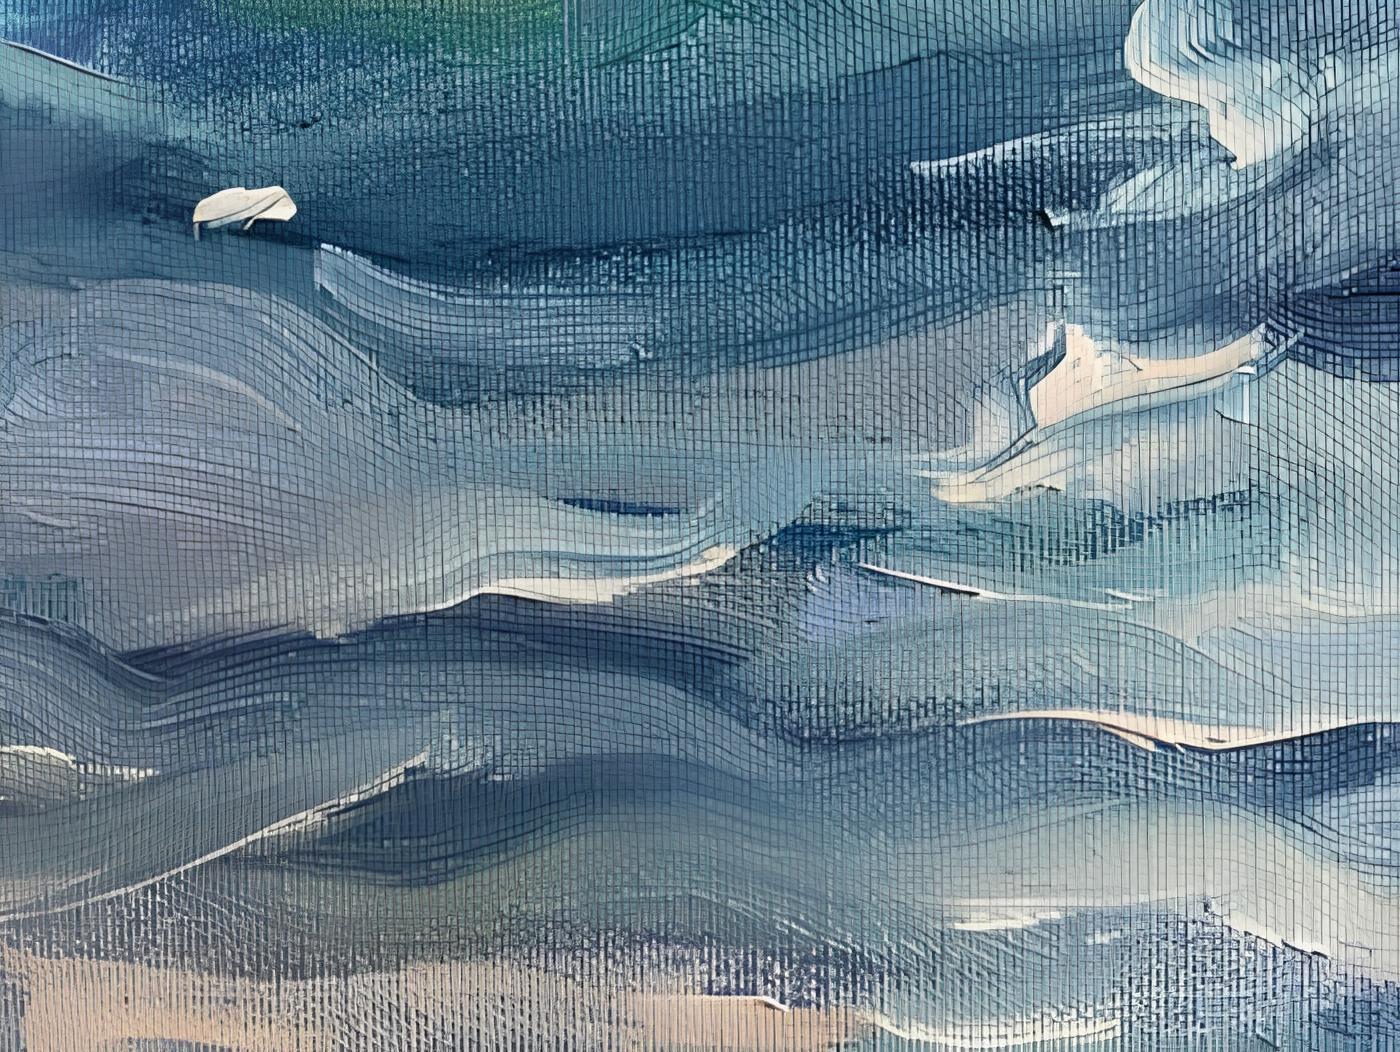 In crafting this piece, I was deeply moved by the serene interplay of humanity and the sea. Employing oil paints, I tapped into the impressionistic soul, capturing the fleeting caress of light on water and the tranquility of a solitary figure